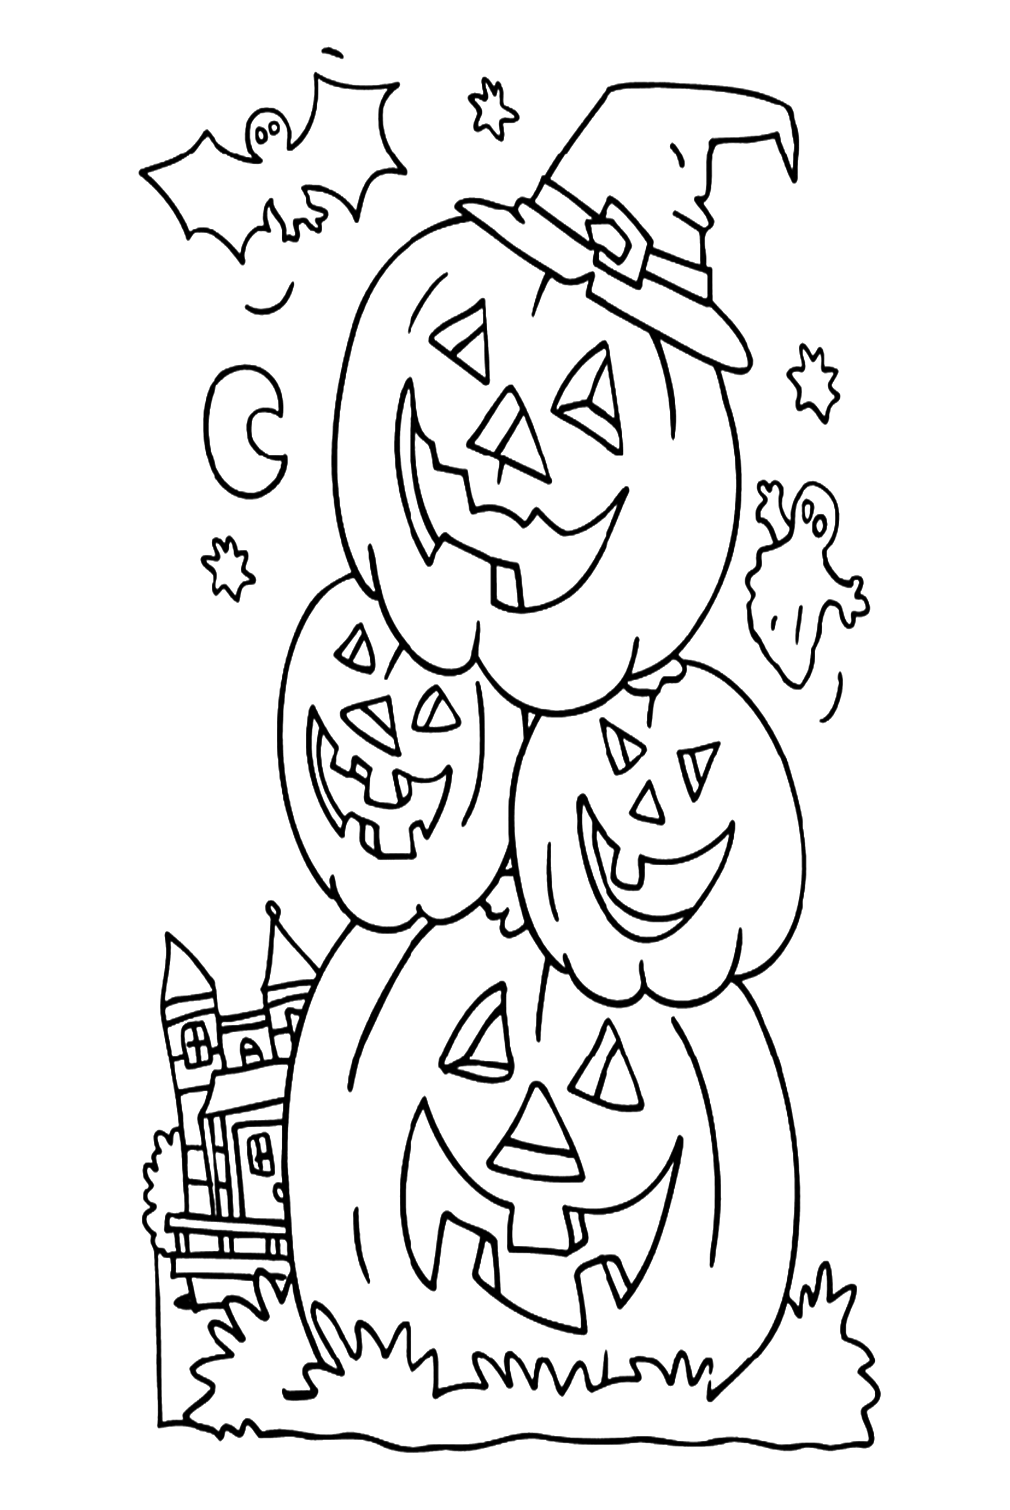 Stack Of Halloween Pumpkins Coloring Page